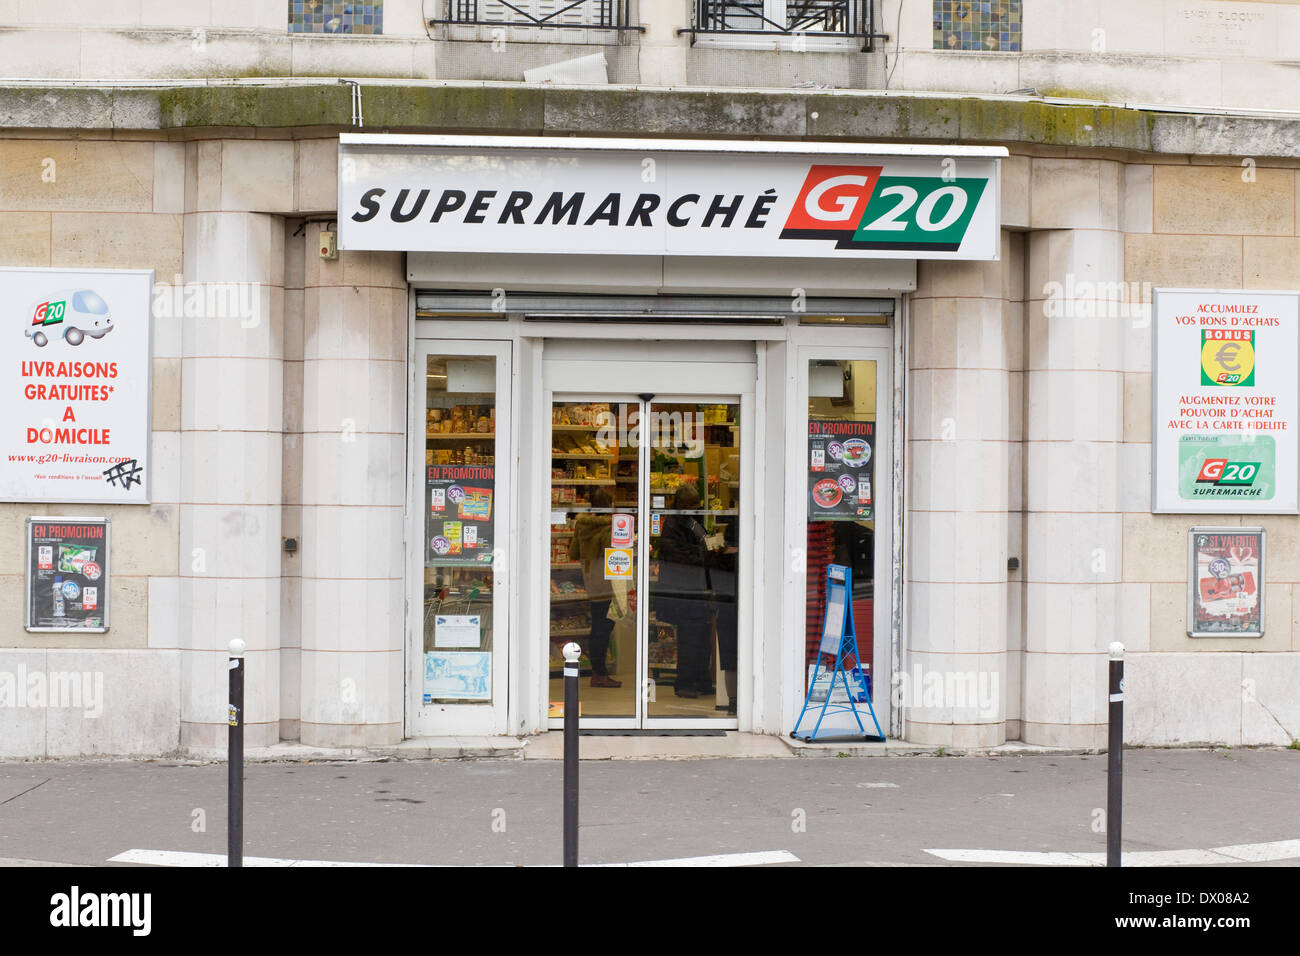 Exterior of Supermarché G20 in Paris France Stock Photo